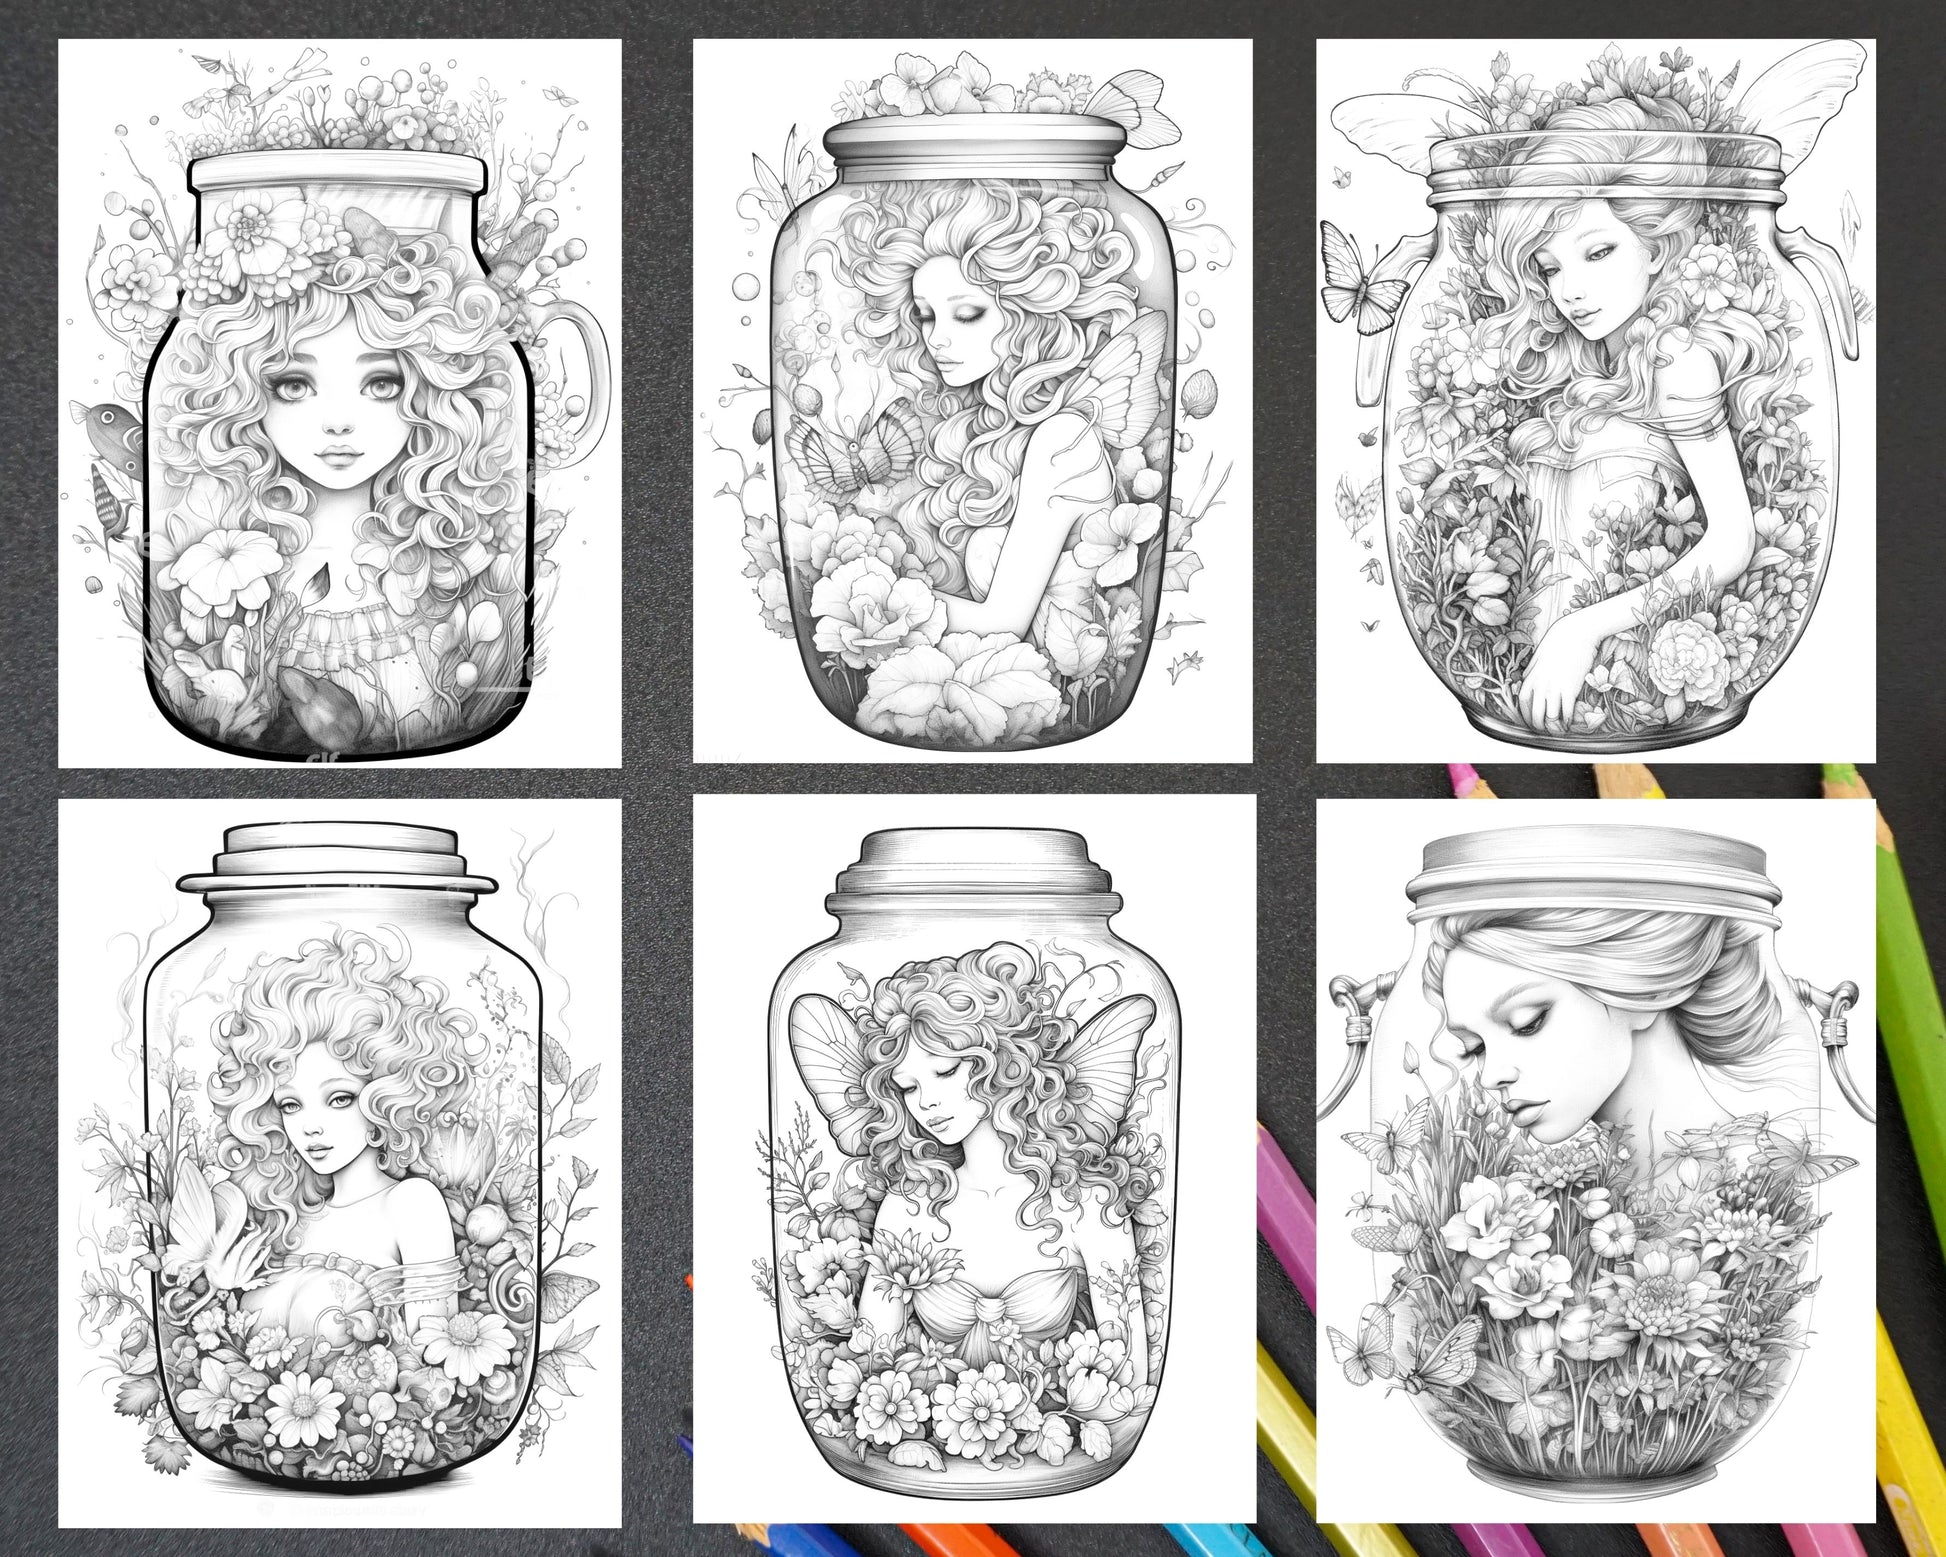 Beautiful fairies in jar grayscale coloring pages printable for adu â coloring